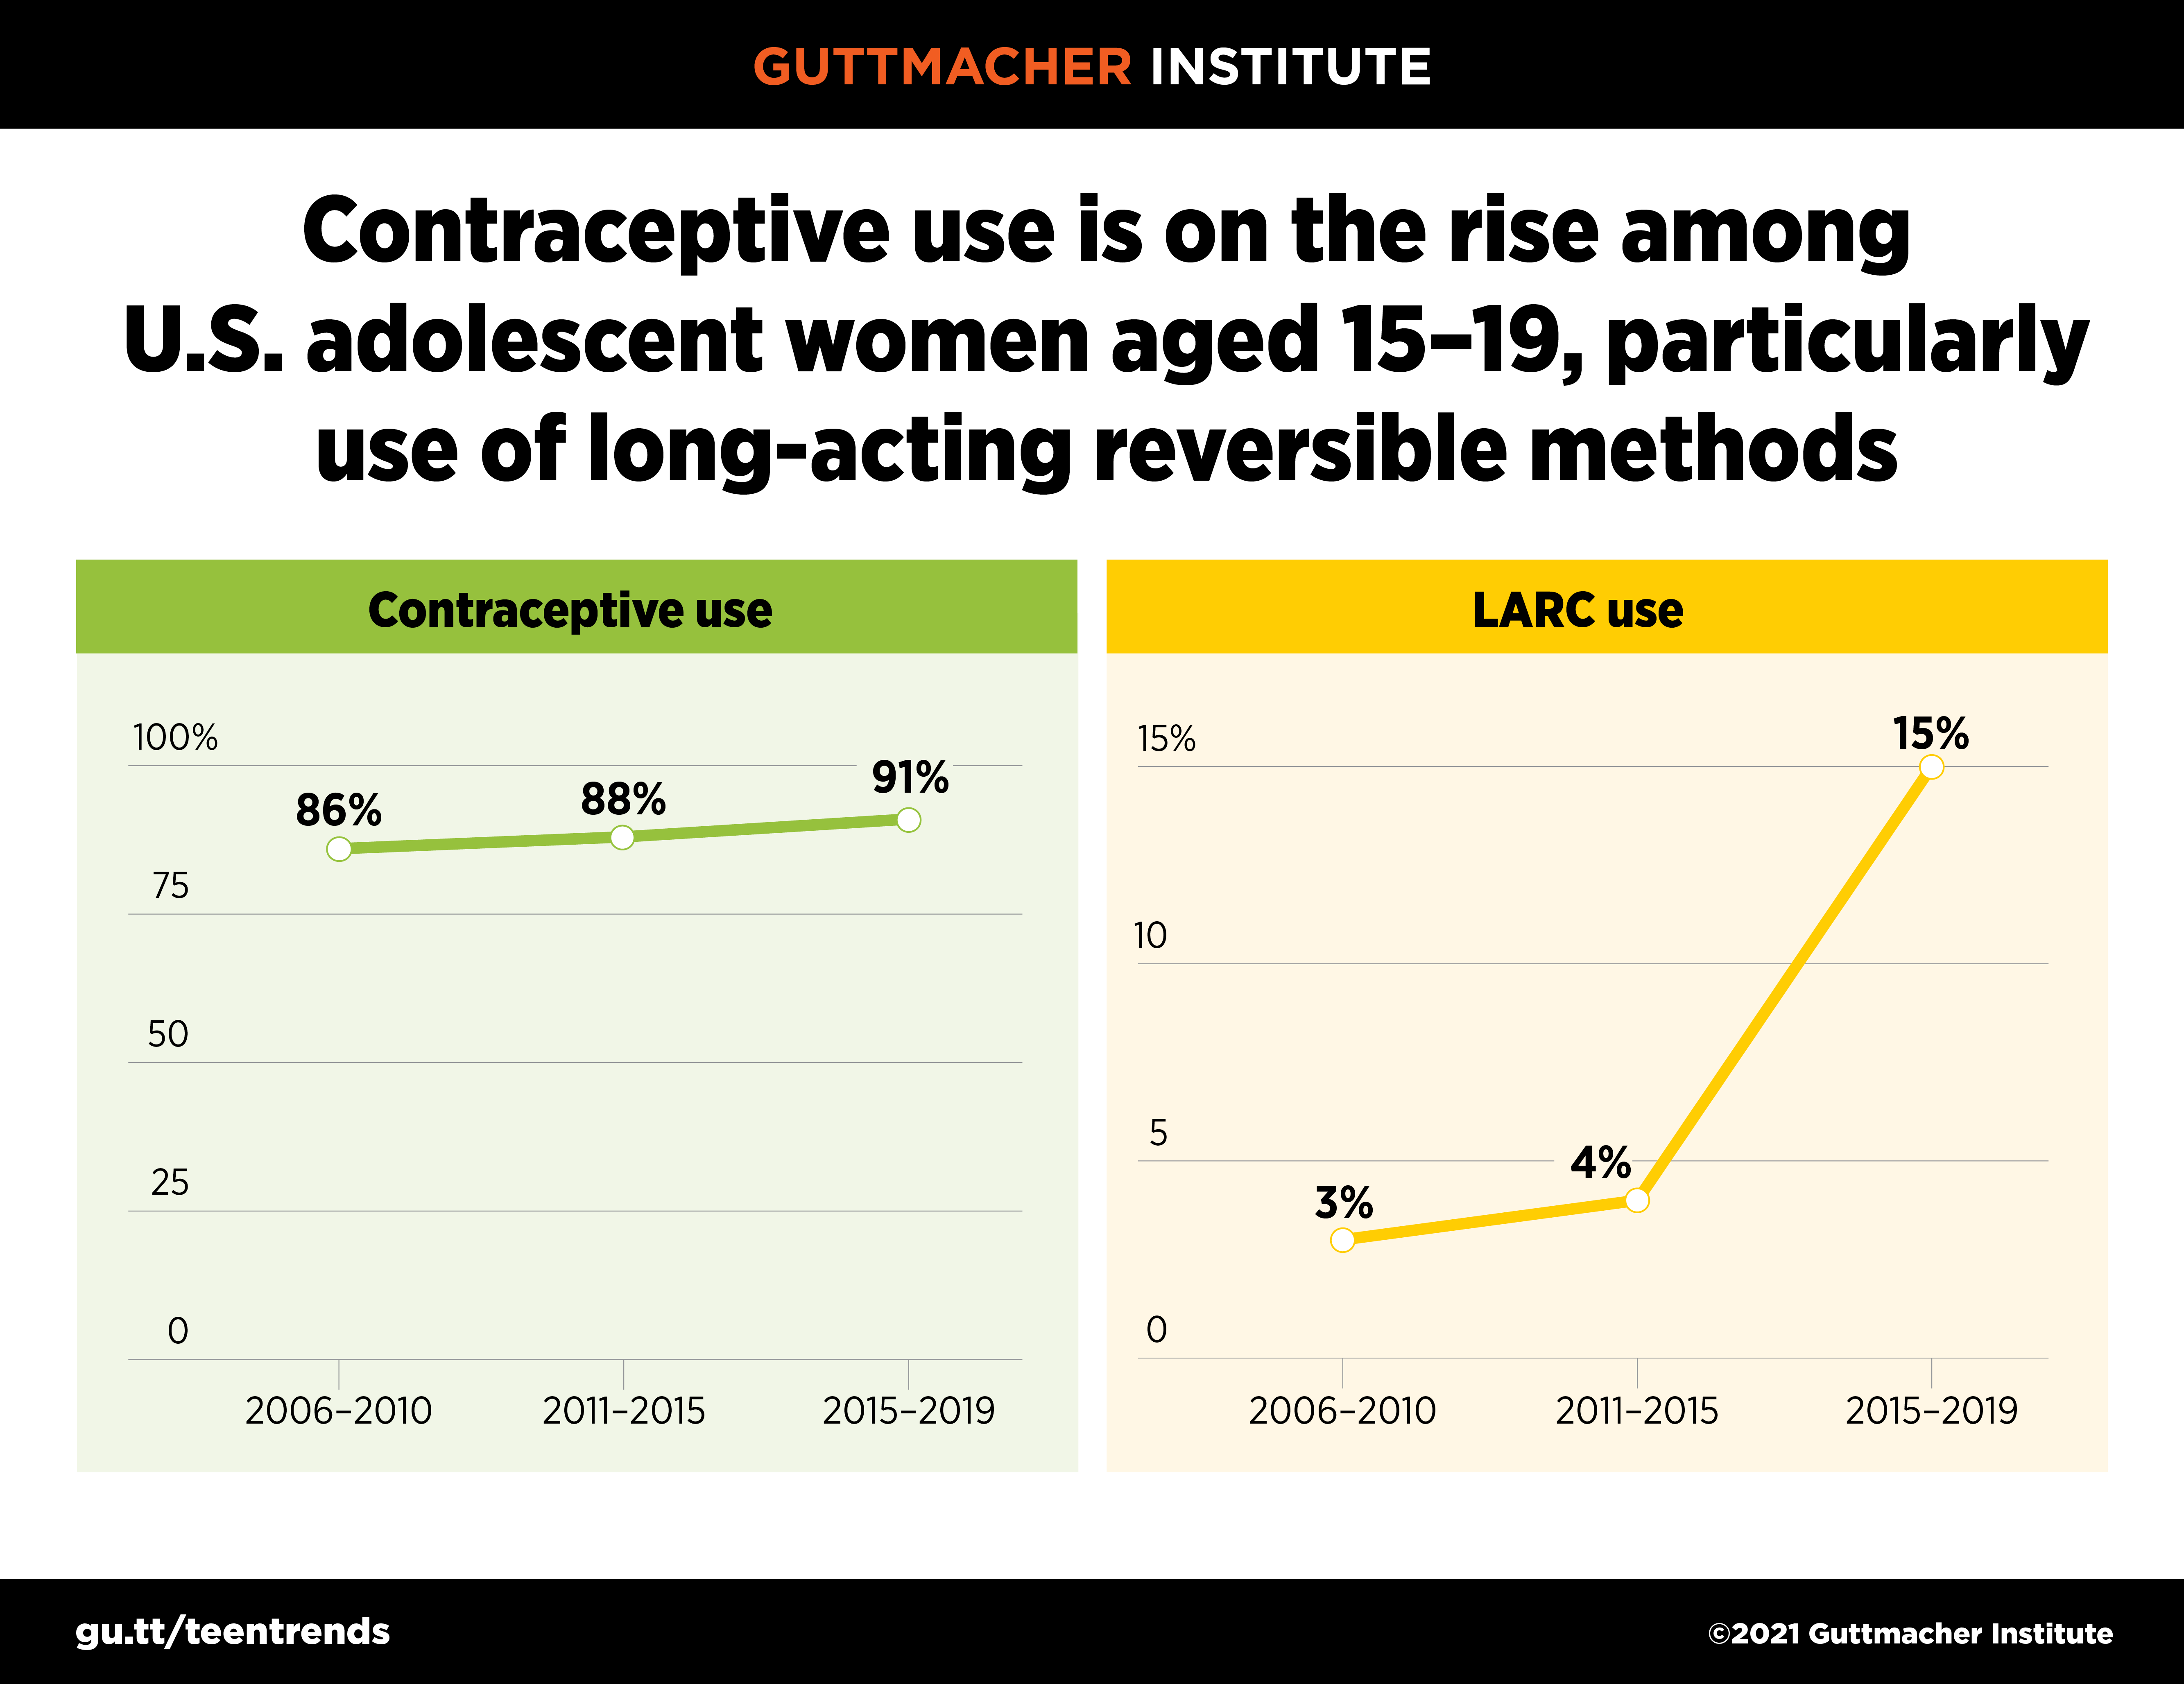 Contraceptive use is on the rise among U.S. adolescent women aged 15-19, particularly use of long-acting reversible methods